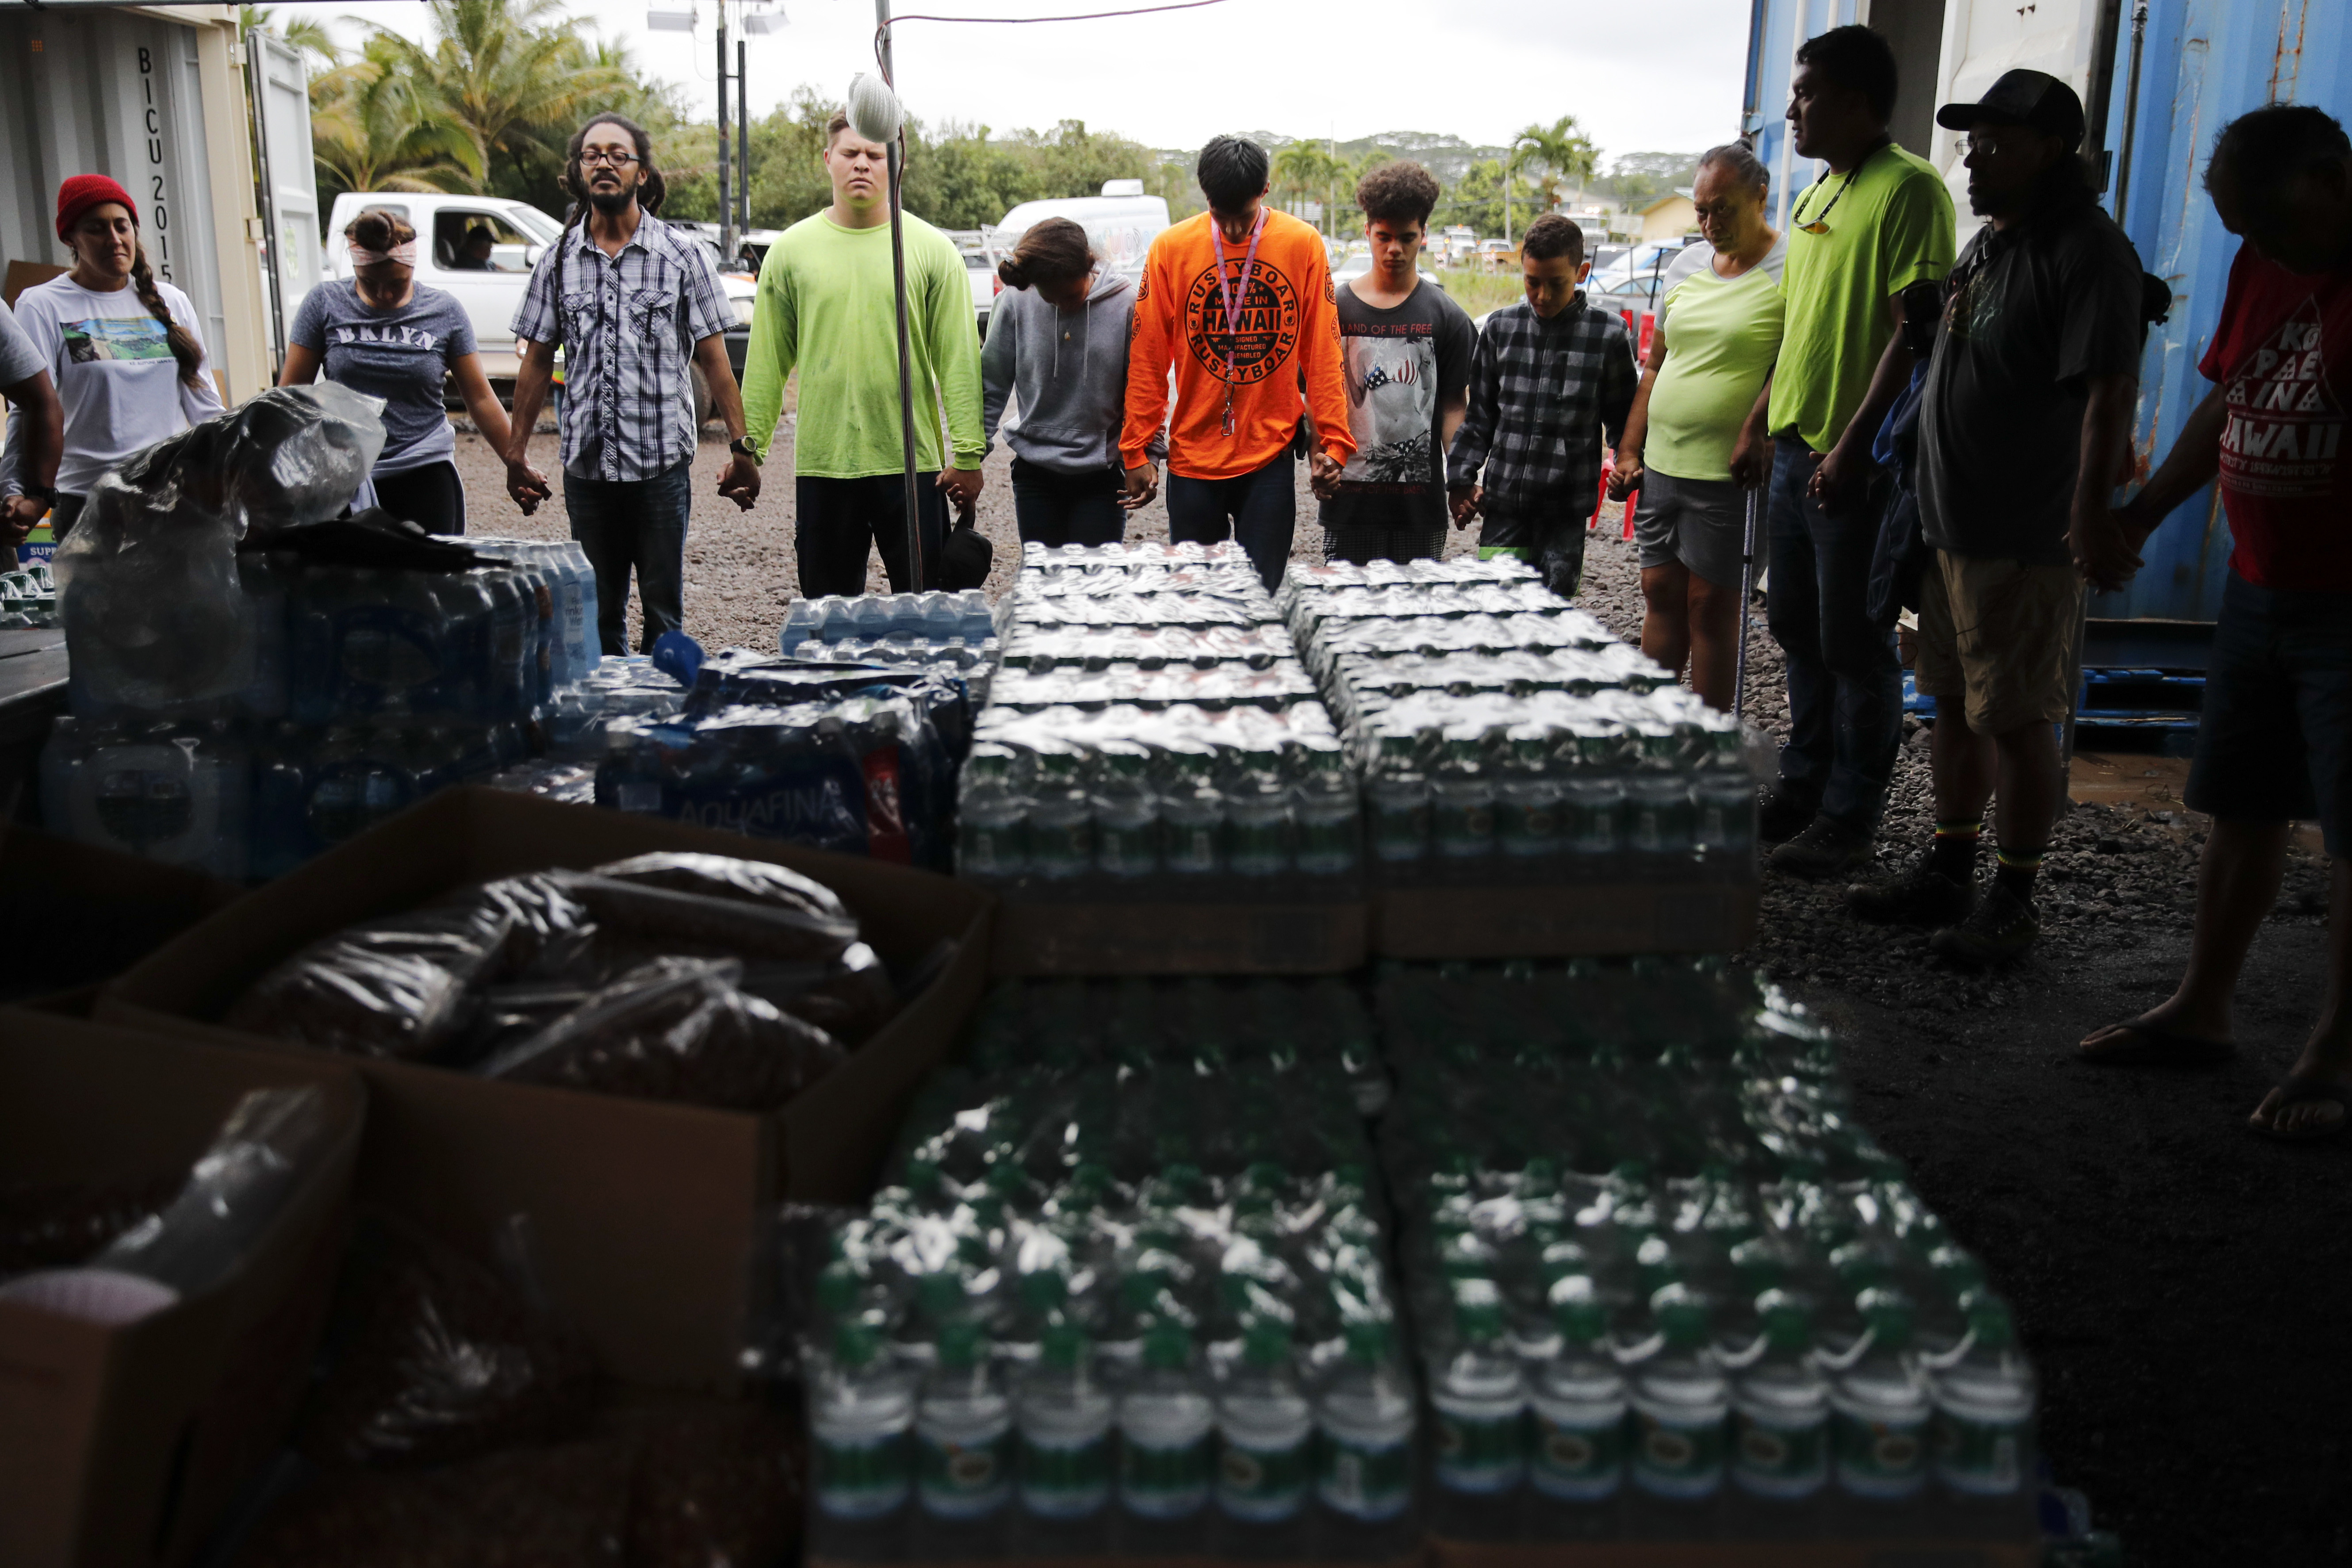 Volunteers and evacuees hold in hands while praying before serving dinner at a makeshift donation center Tuesday, May 8, 2018, in Pahoa, Hawaii. Hawaii County officials have issued a cellphone alert warning residents of a subdivision to immediately evacuate after two new lava fissures opened in a neighboring community. (AP Photo/Jae C. Hong)